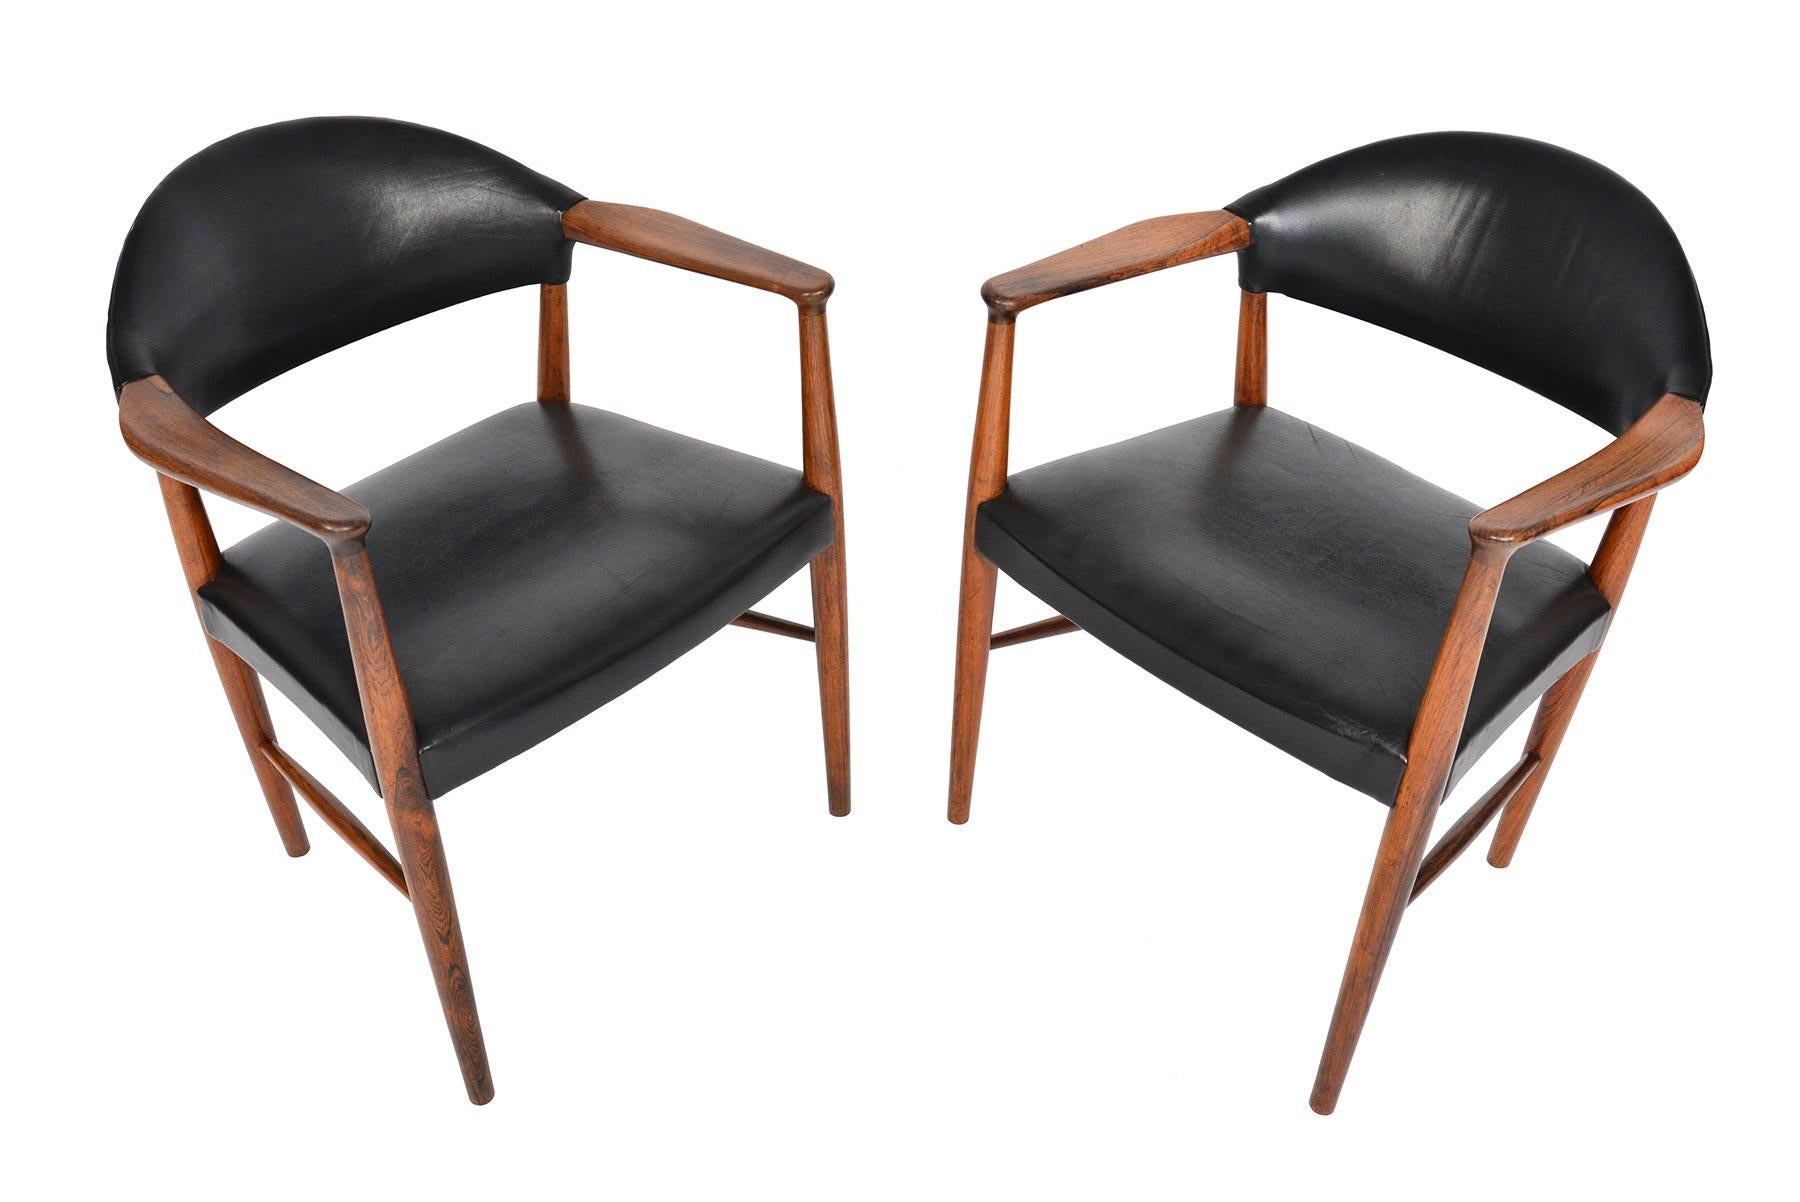 Designed by Kurt Olsen for Slagelse Møbelværk in 1955, this pair of armchairs model 223 offer a design that is both timeless and modern. Crafted in beautiful Brazilian rosewood, chairs wear their original patinated black leather covers. Originally